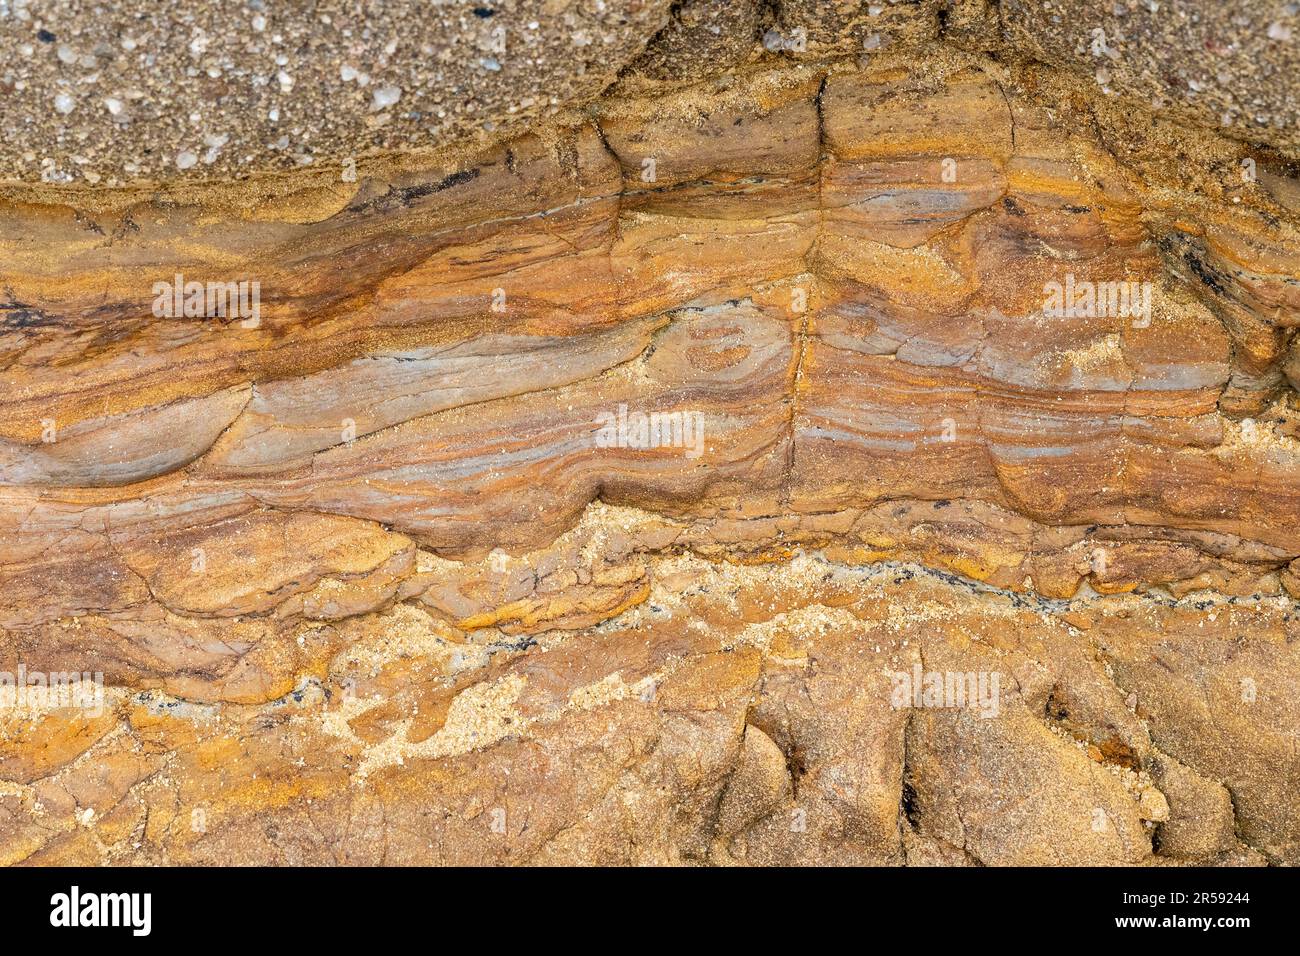 Beautiful sandstone at Salt Point State Park, California, USA, displaying different layers of rock Stock Photo